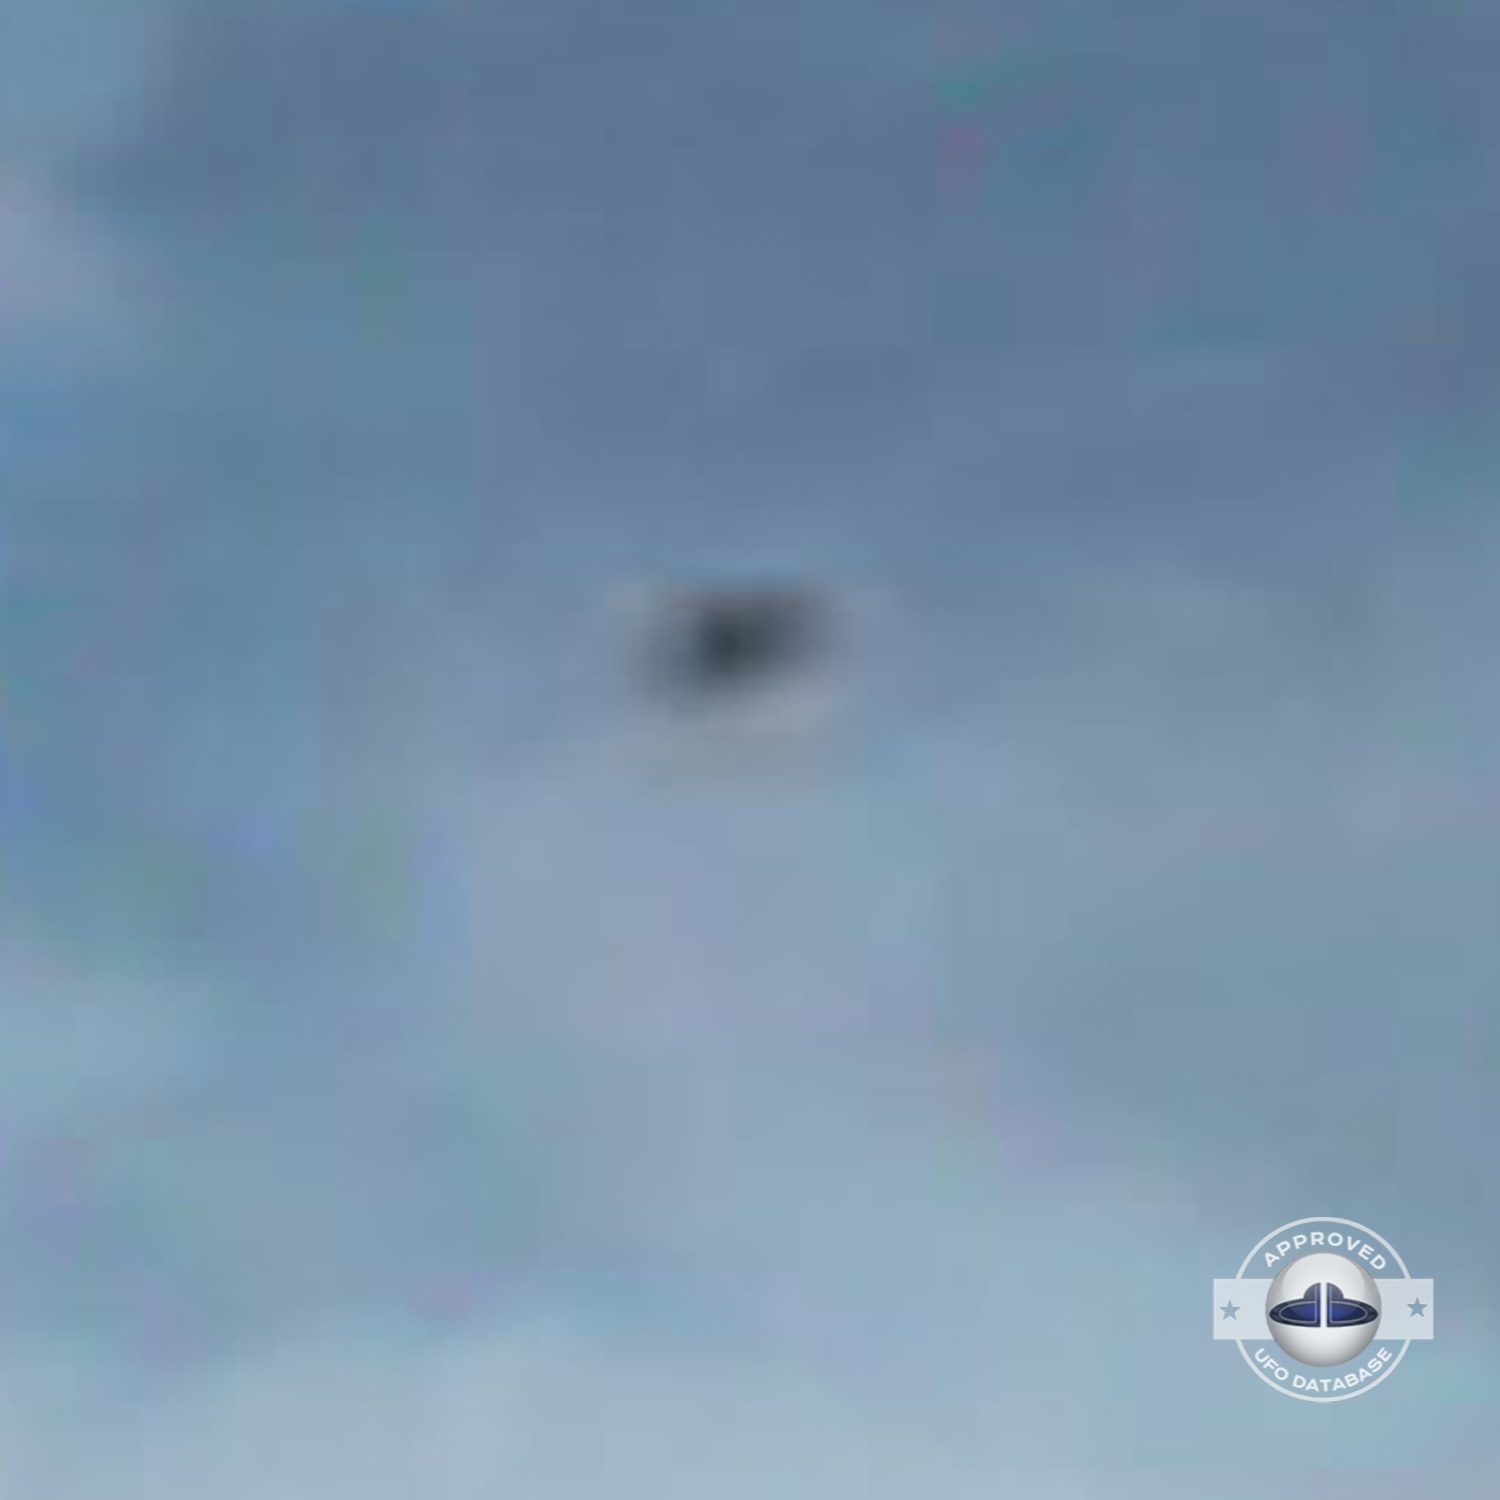 While taking a picture of 2 persons near lake Titicaca, capture a UFO UFO Picture #82-4